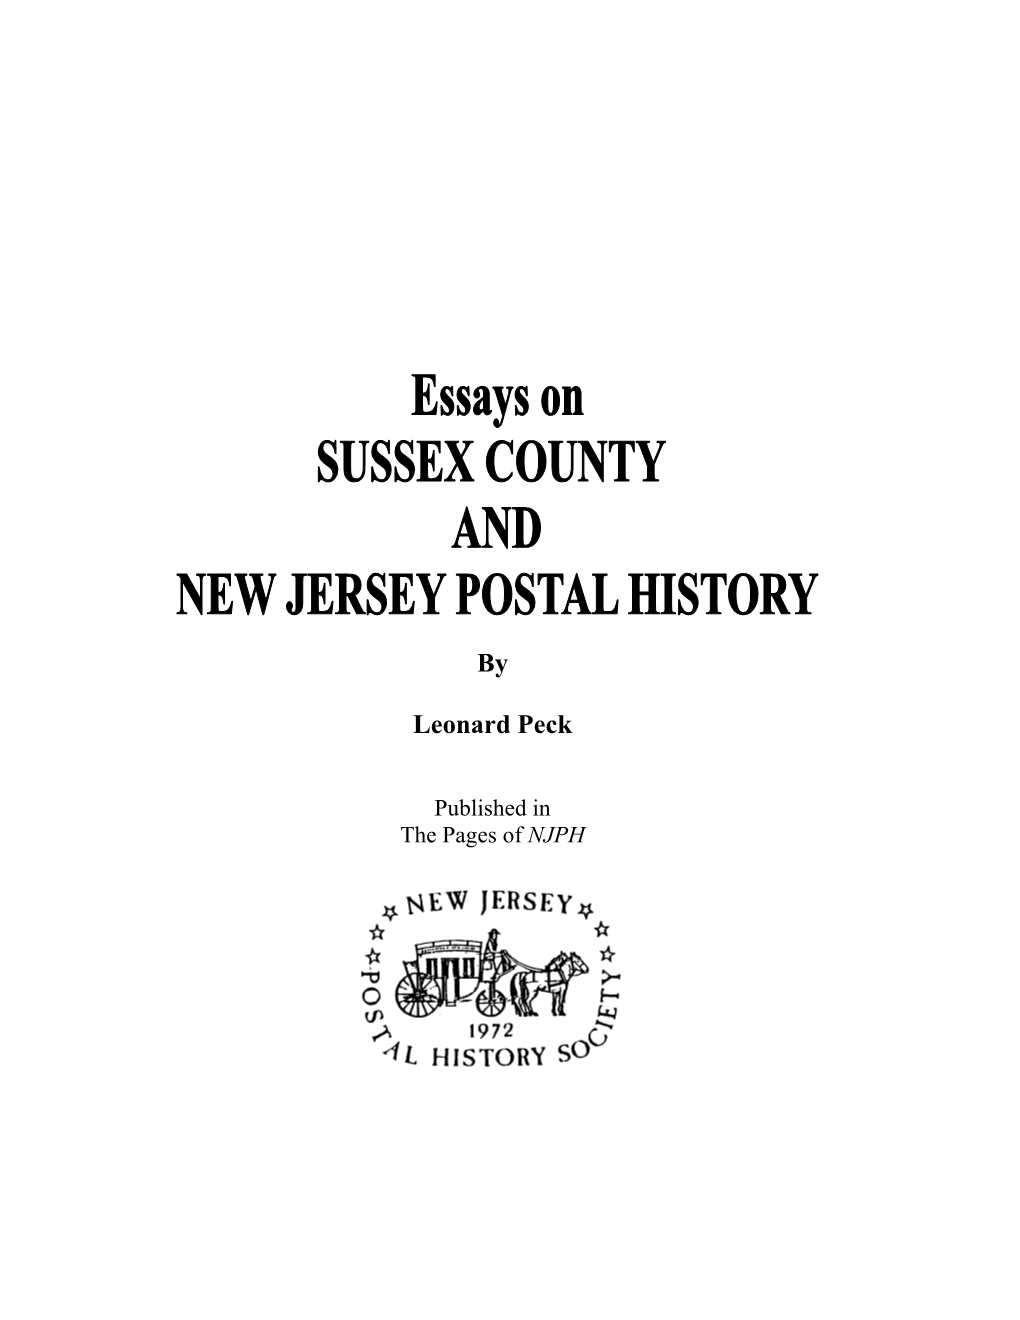 Essays on Sussex County and New